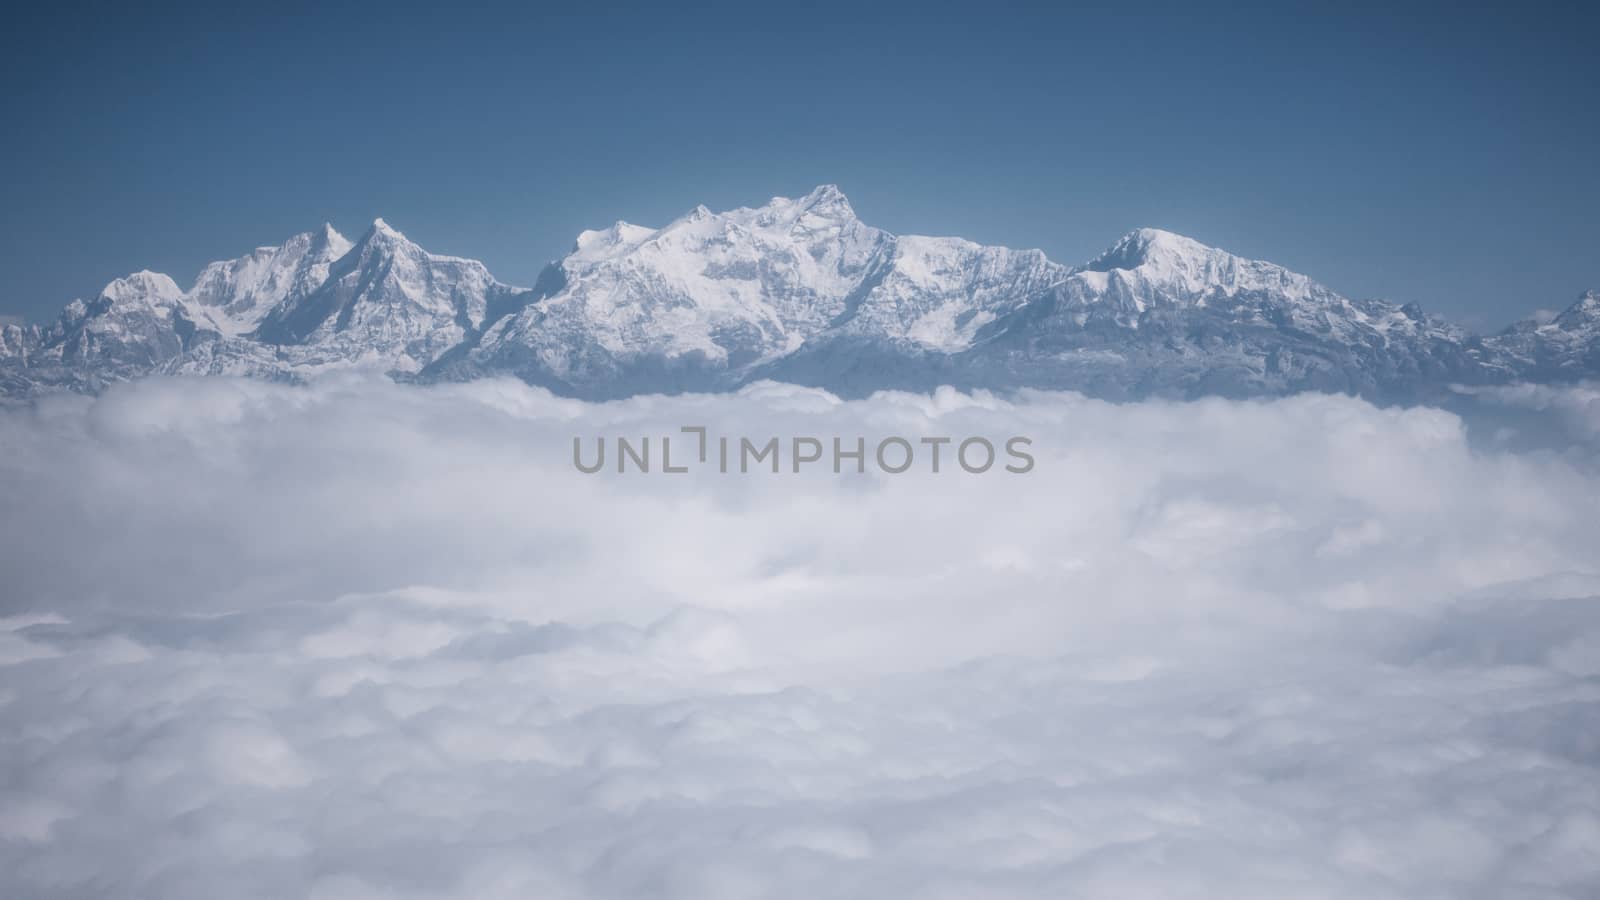 The Himalayas as seen from an airplane in Nepal. Layer of clouds beneath the mountain tops.